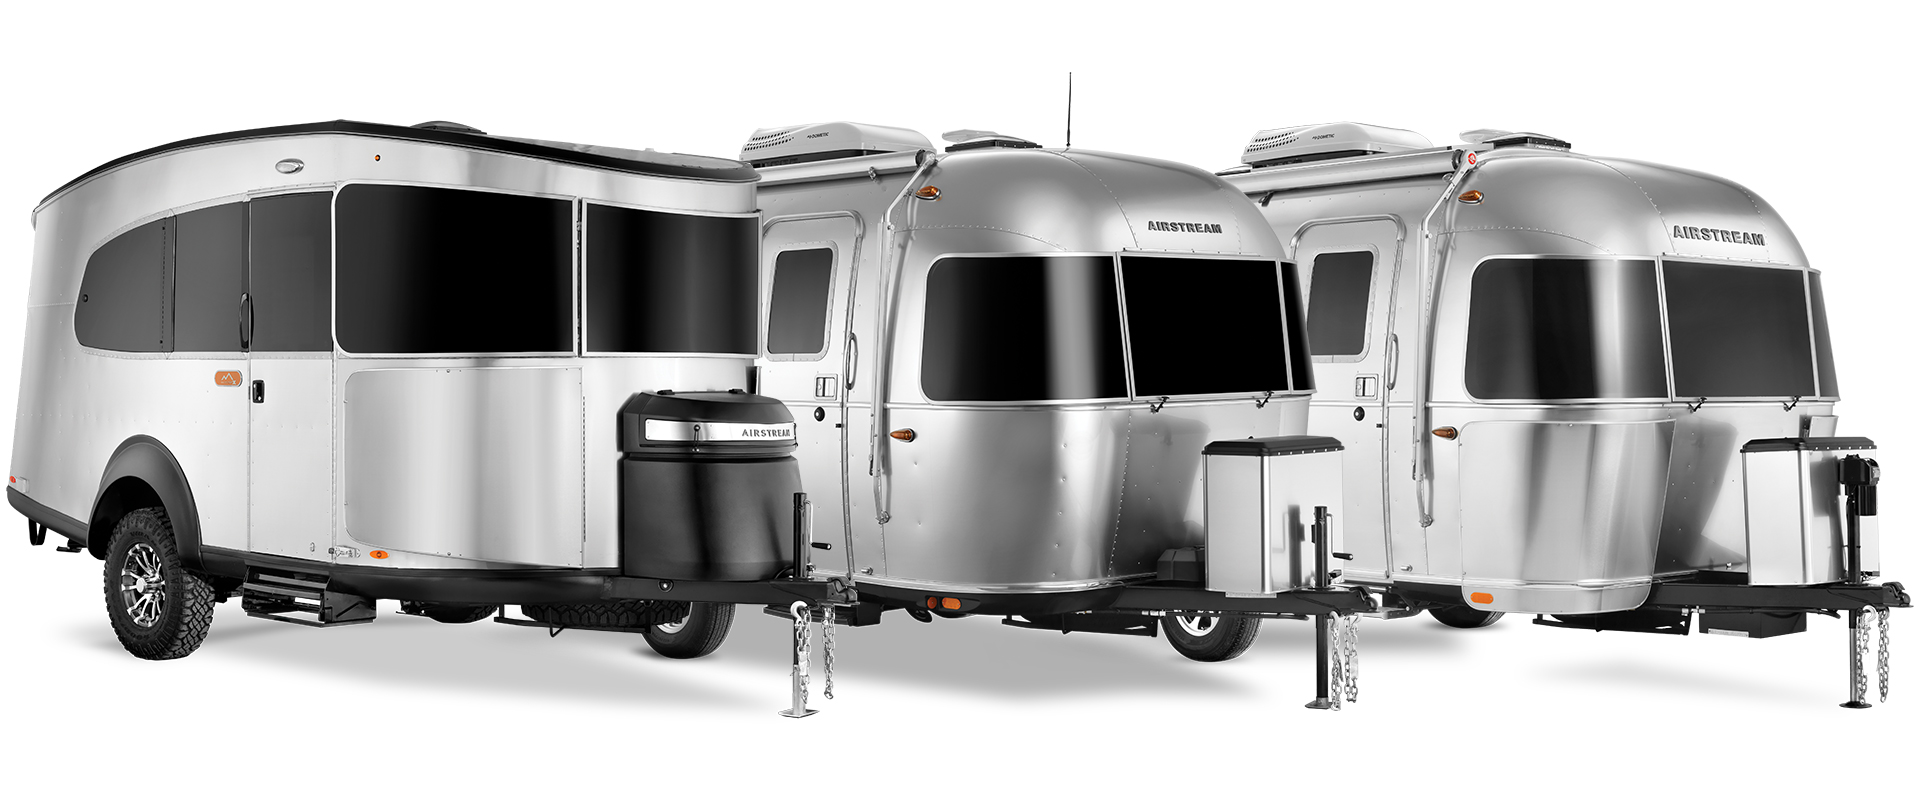 Airstream travel trailers Basecamp, Bambi, and Caravel lined up on a white background.